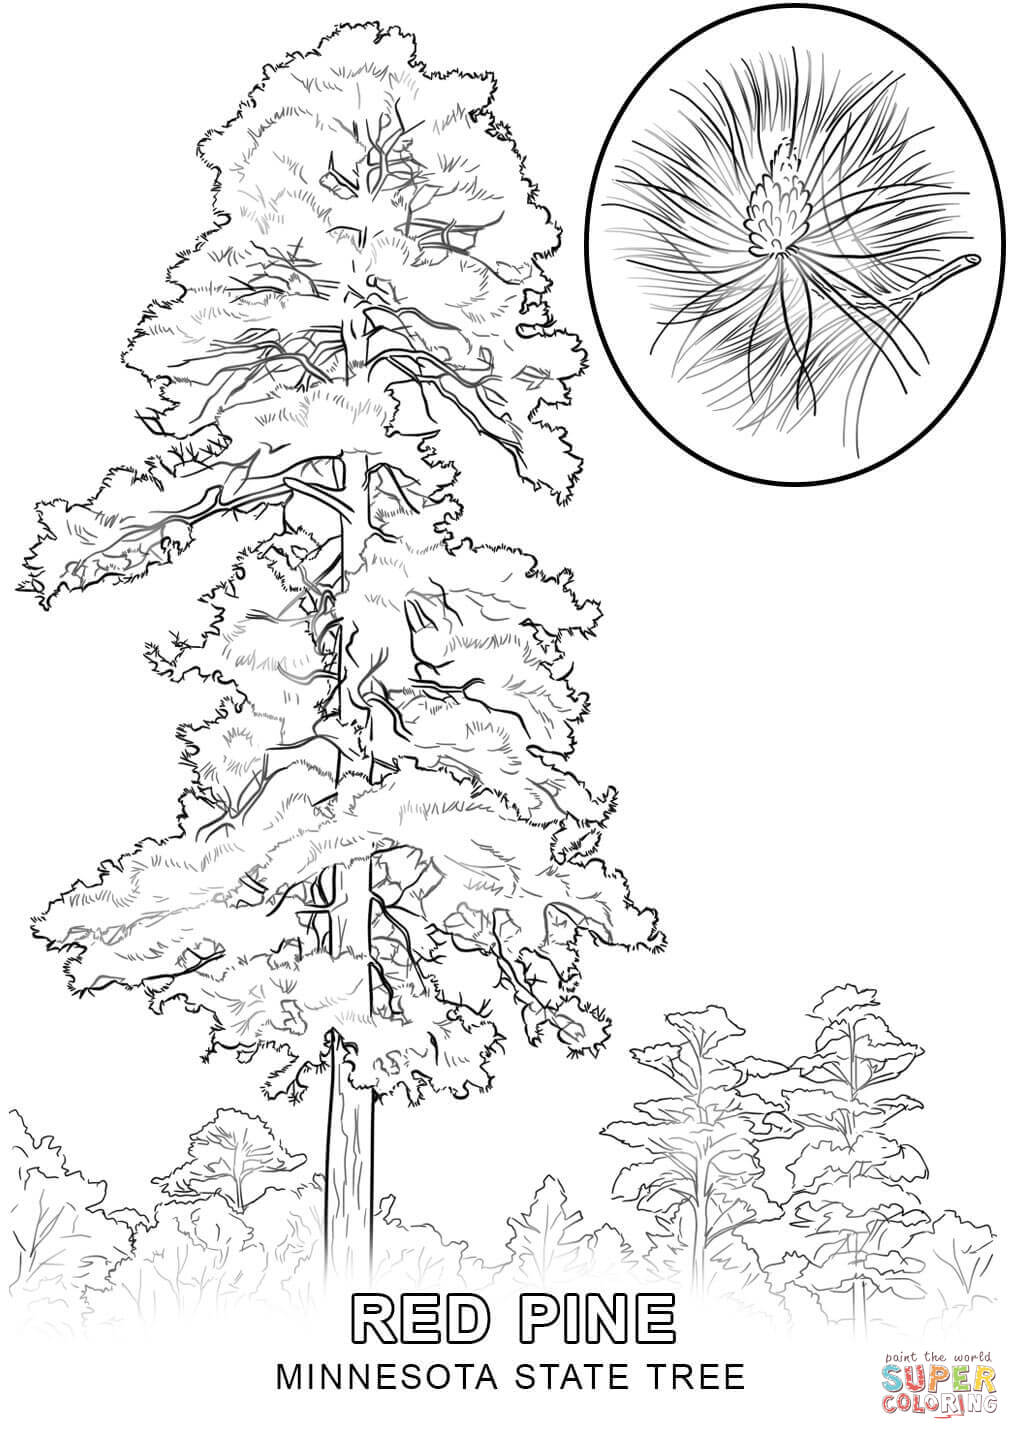 Minnesota State Tree coloring page | Free Printable Coloring Pages